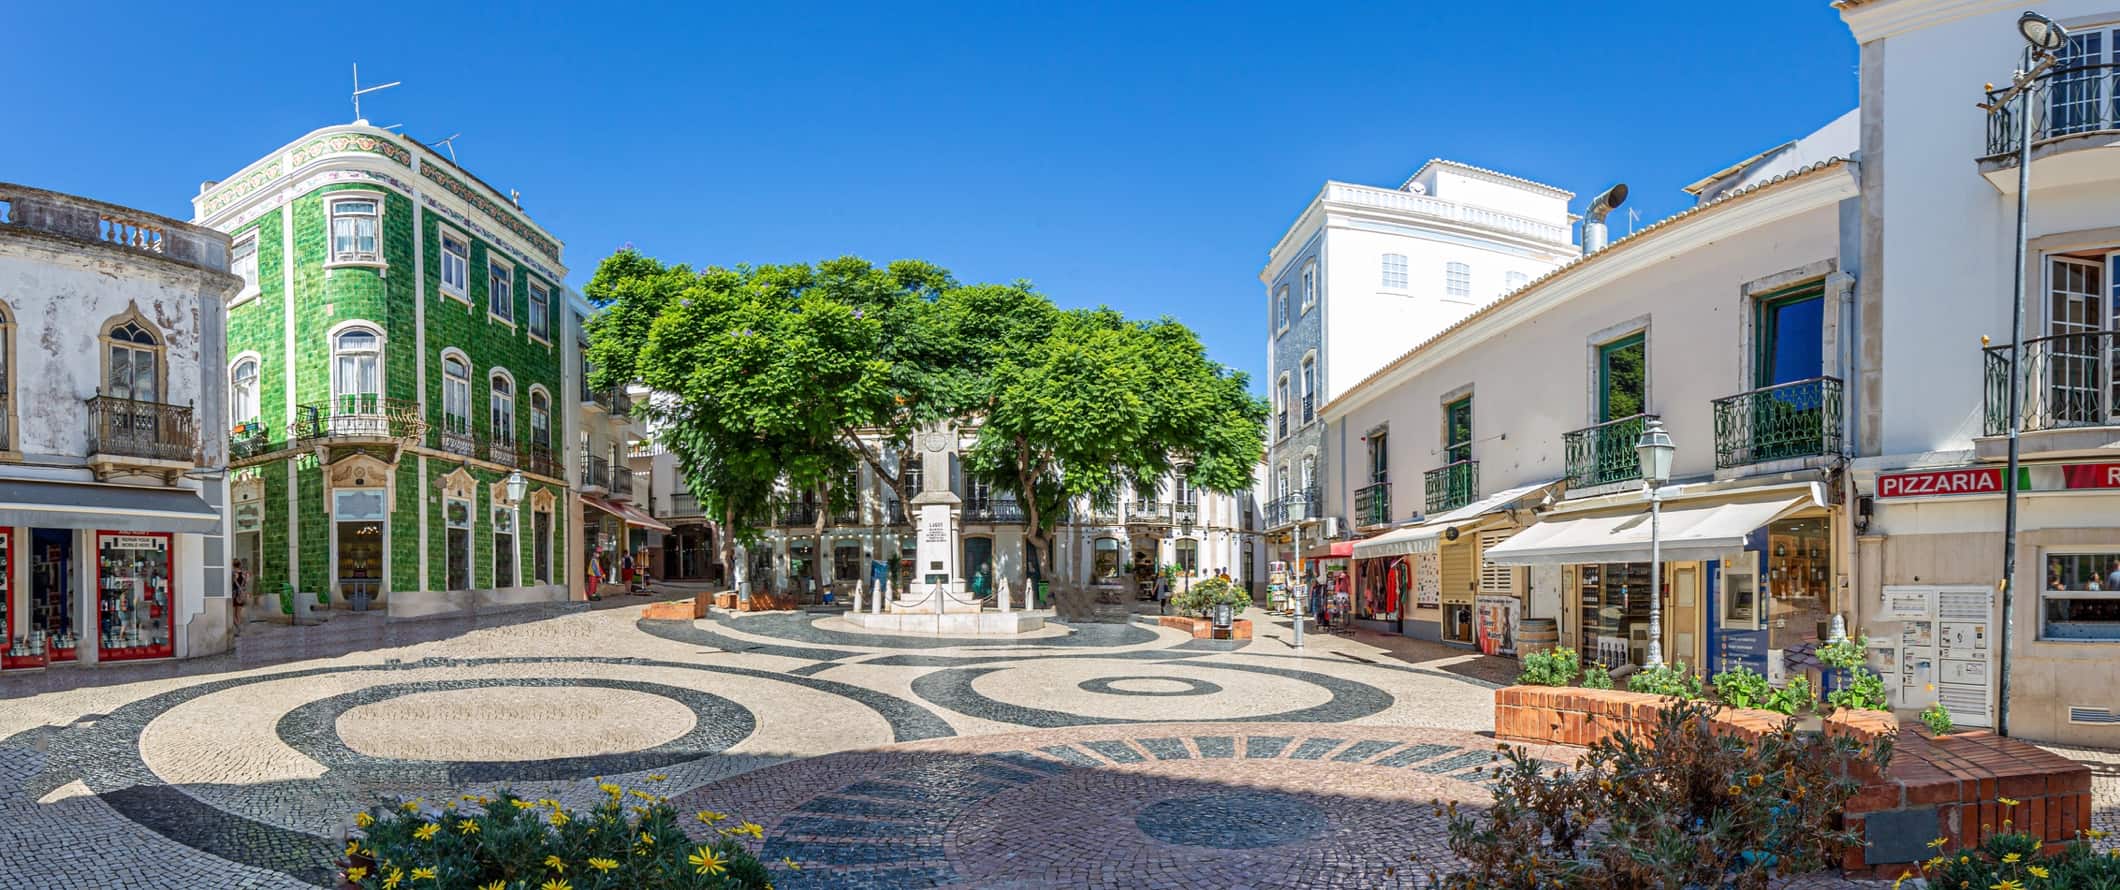 The charming town of Lagos, Portugal featuring an open square and colorful buildings